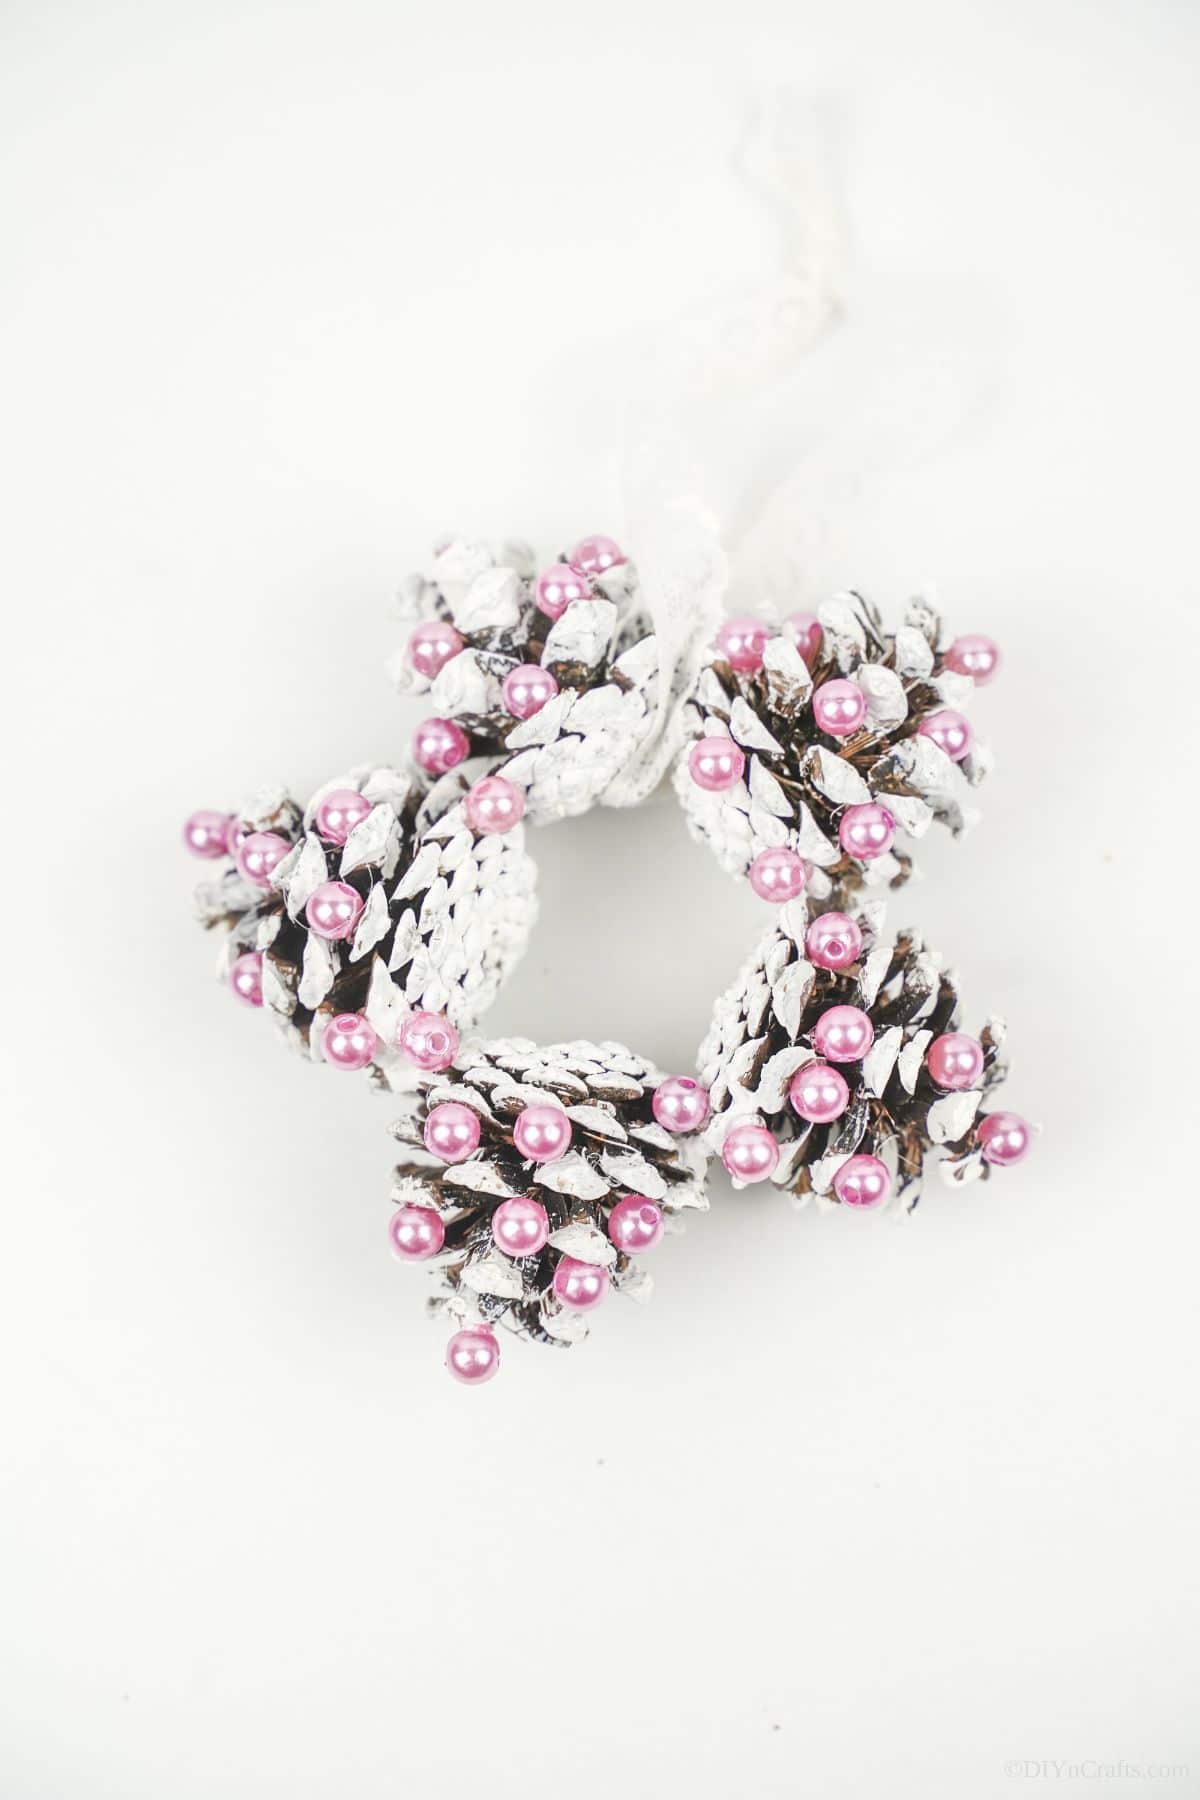 pinecone ornament with pink beads on white table